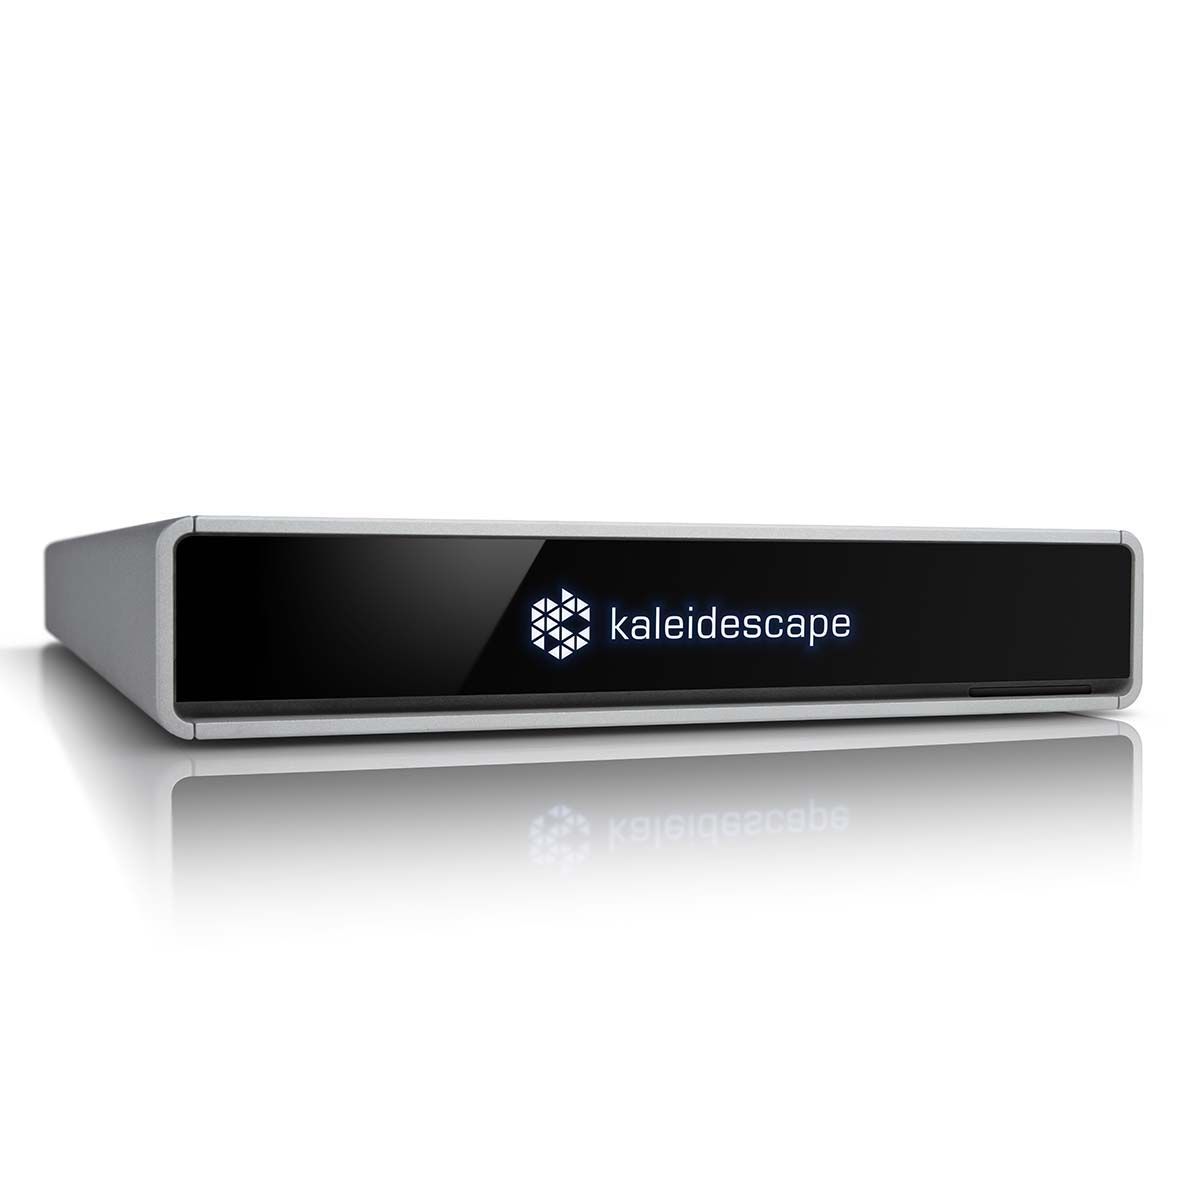 Kaleidescape Compact Terra Movie Server 12TB Storage For Home Theaters | Stores 200 4K UHD Movies